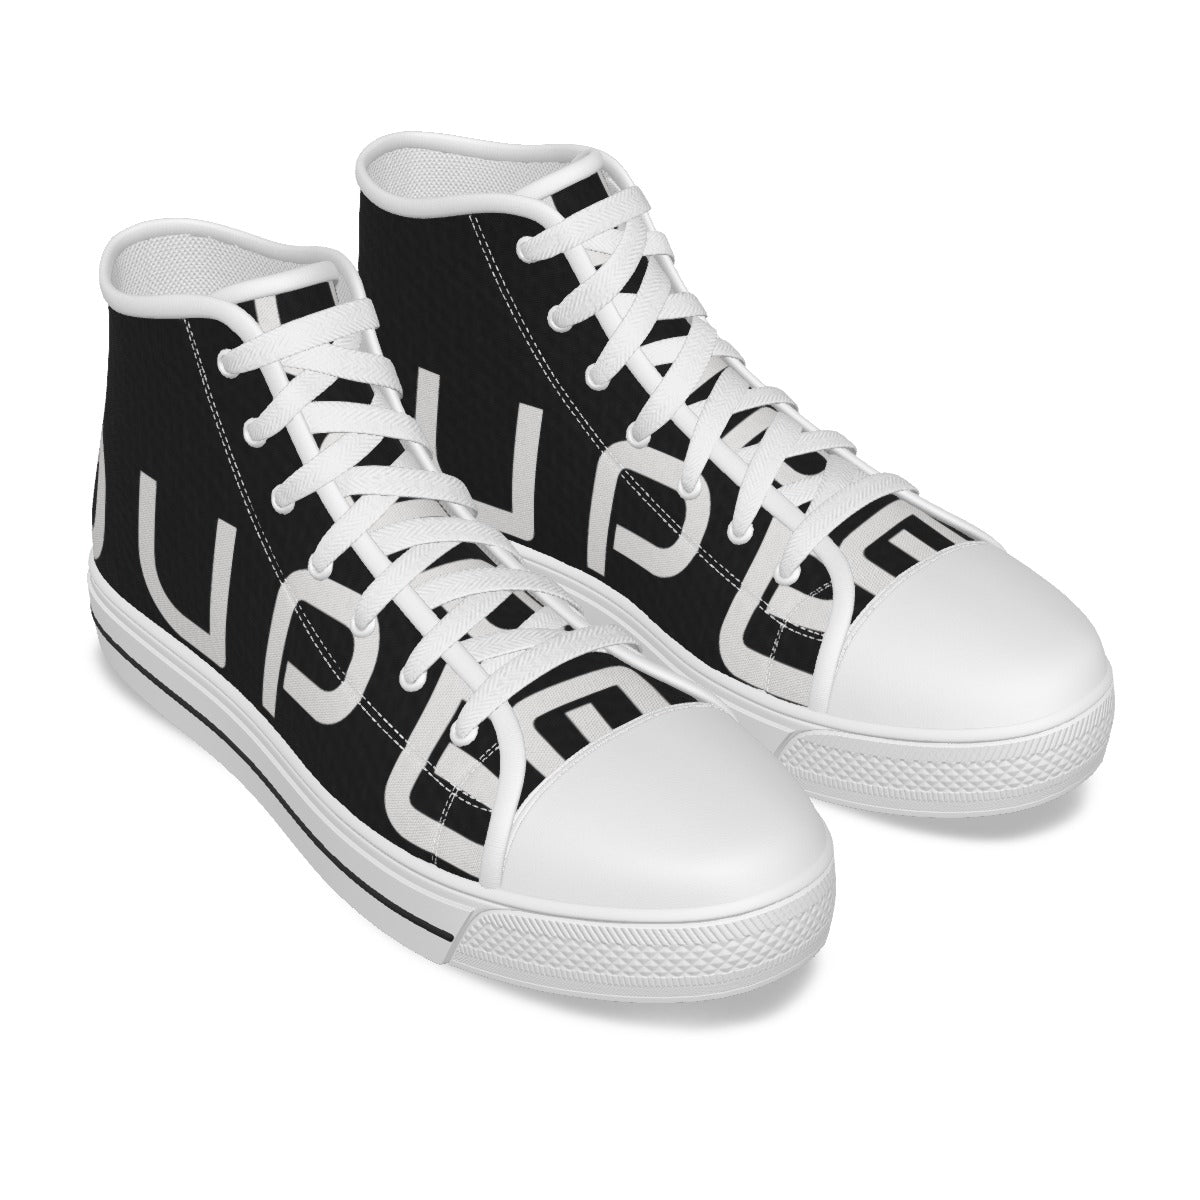 OUPE B/W Men's Canvas Shoes Large writing